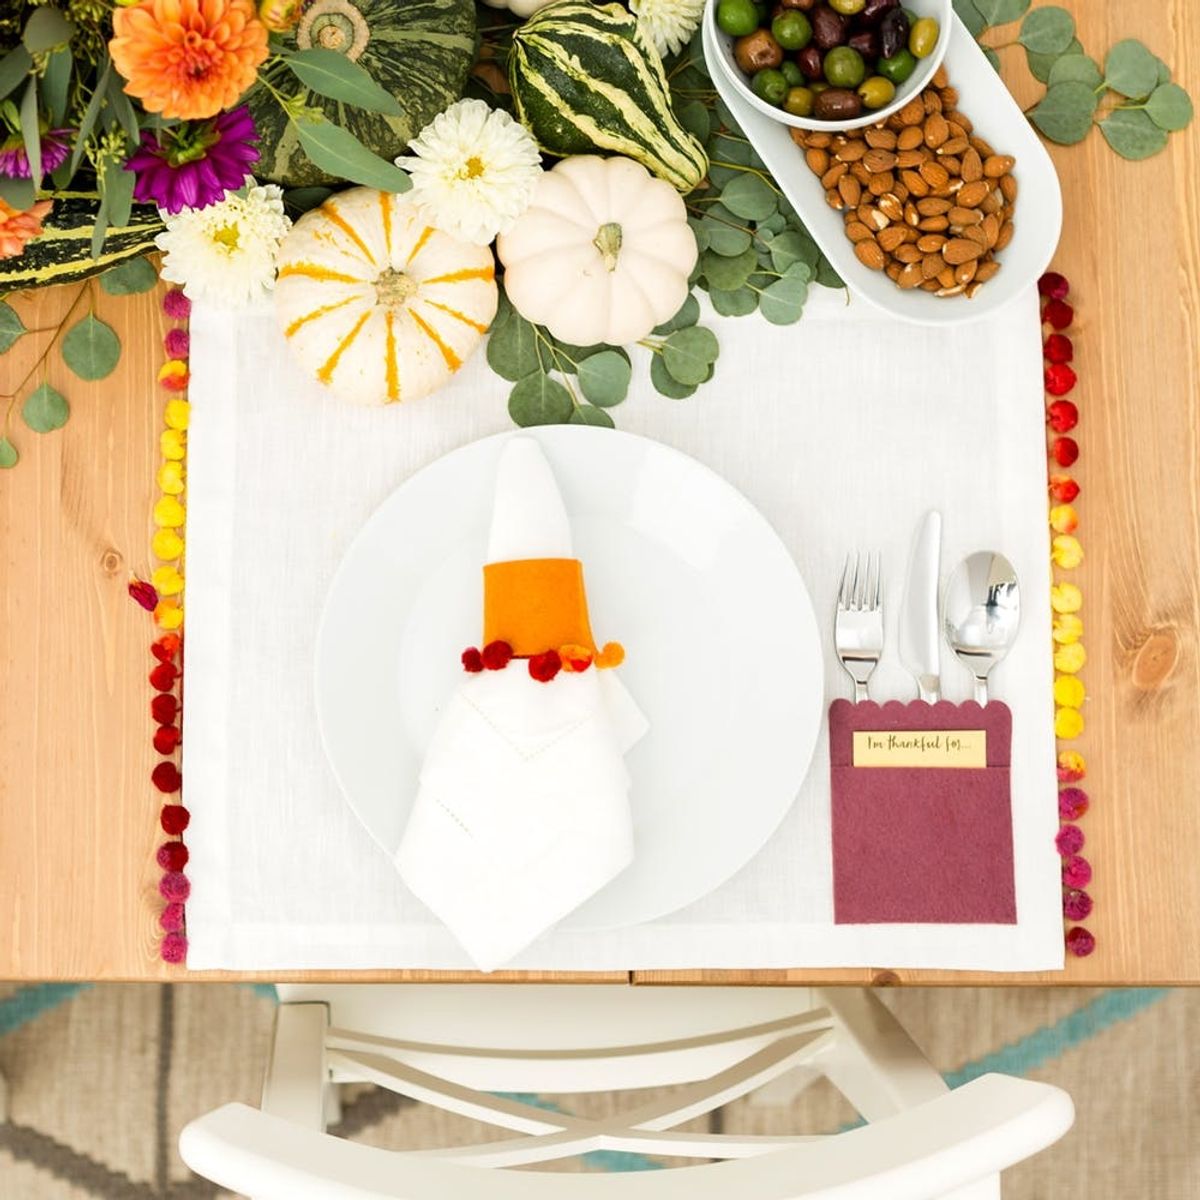 Beginner’s Guide to Preparing for Friendsgiving With IKEA - Brit + Co